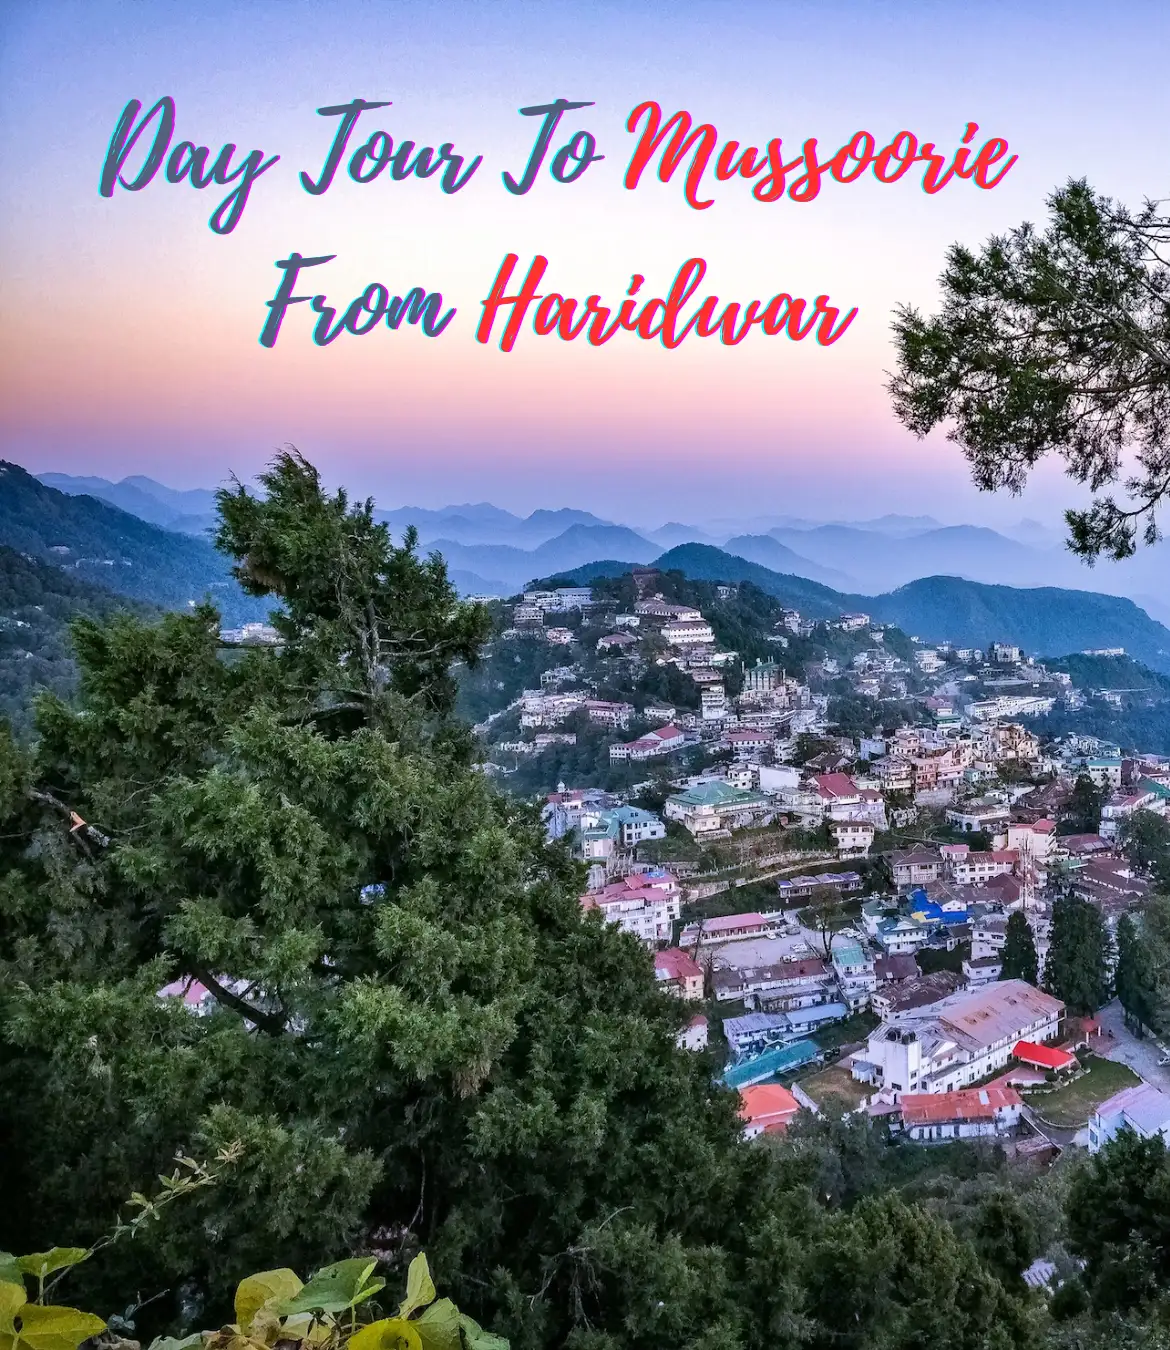 Day Tour To Mussoorie From Haridwar